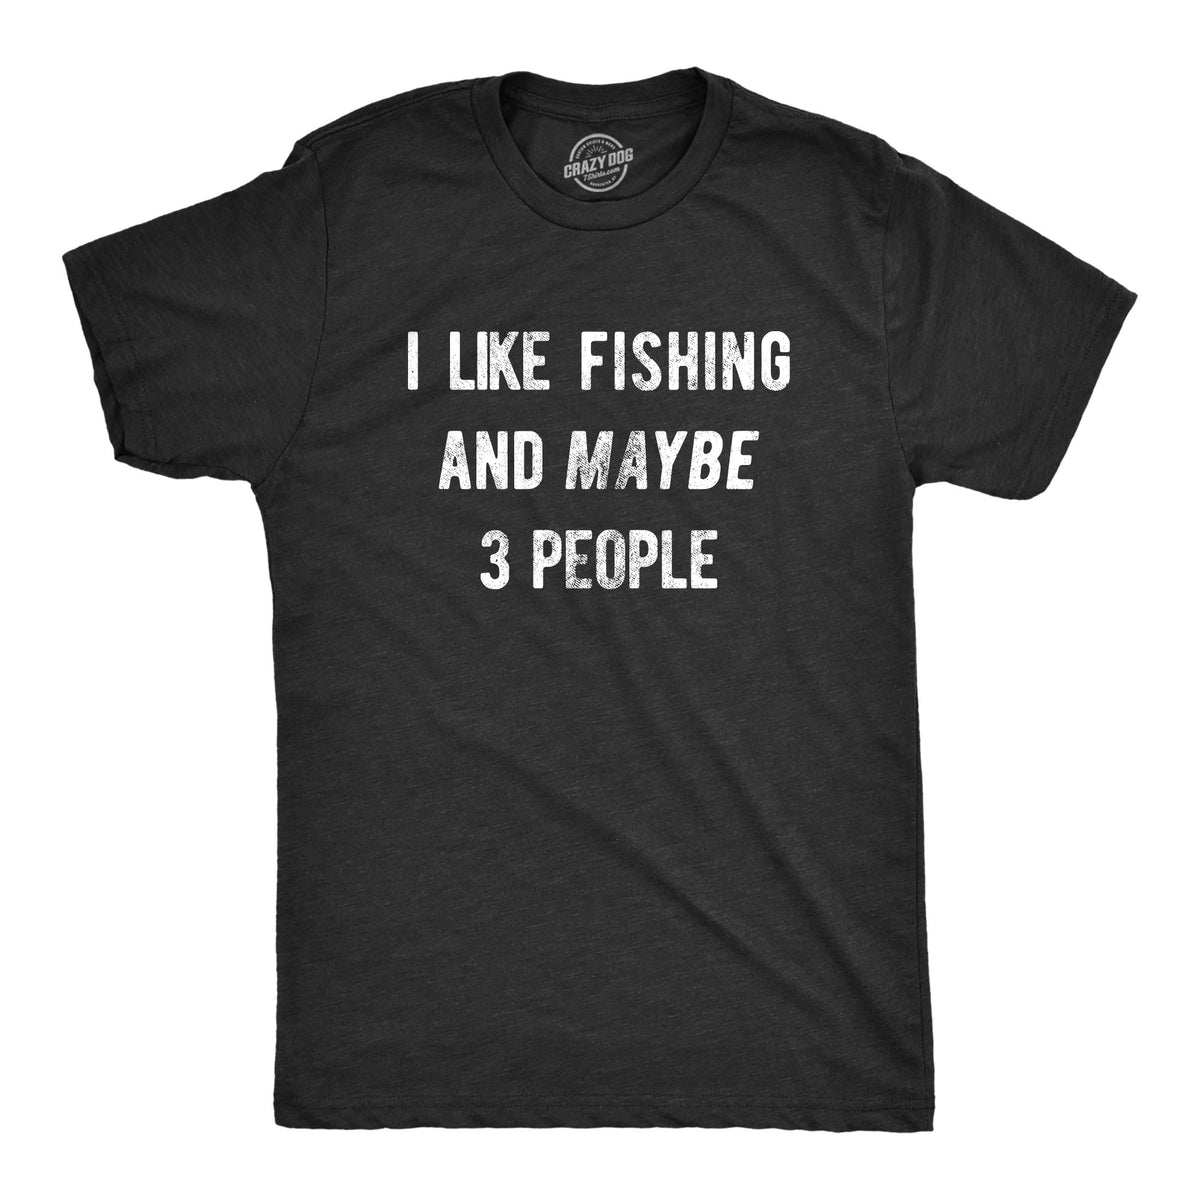 Funny Heather Black I Like Fishing And Maybe 3 People Mens T Shirt Nerdy Tee